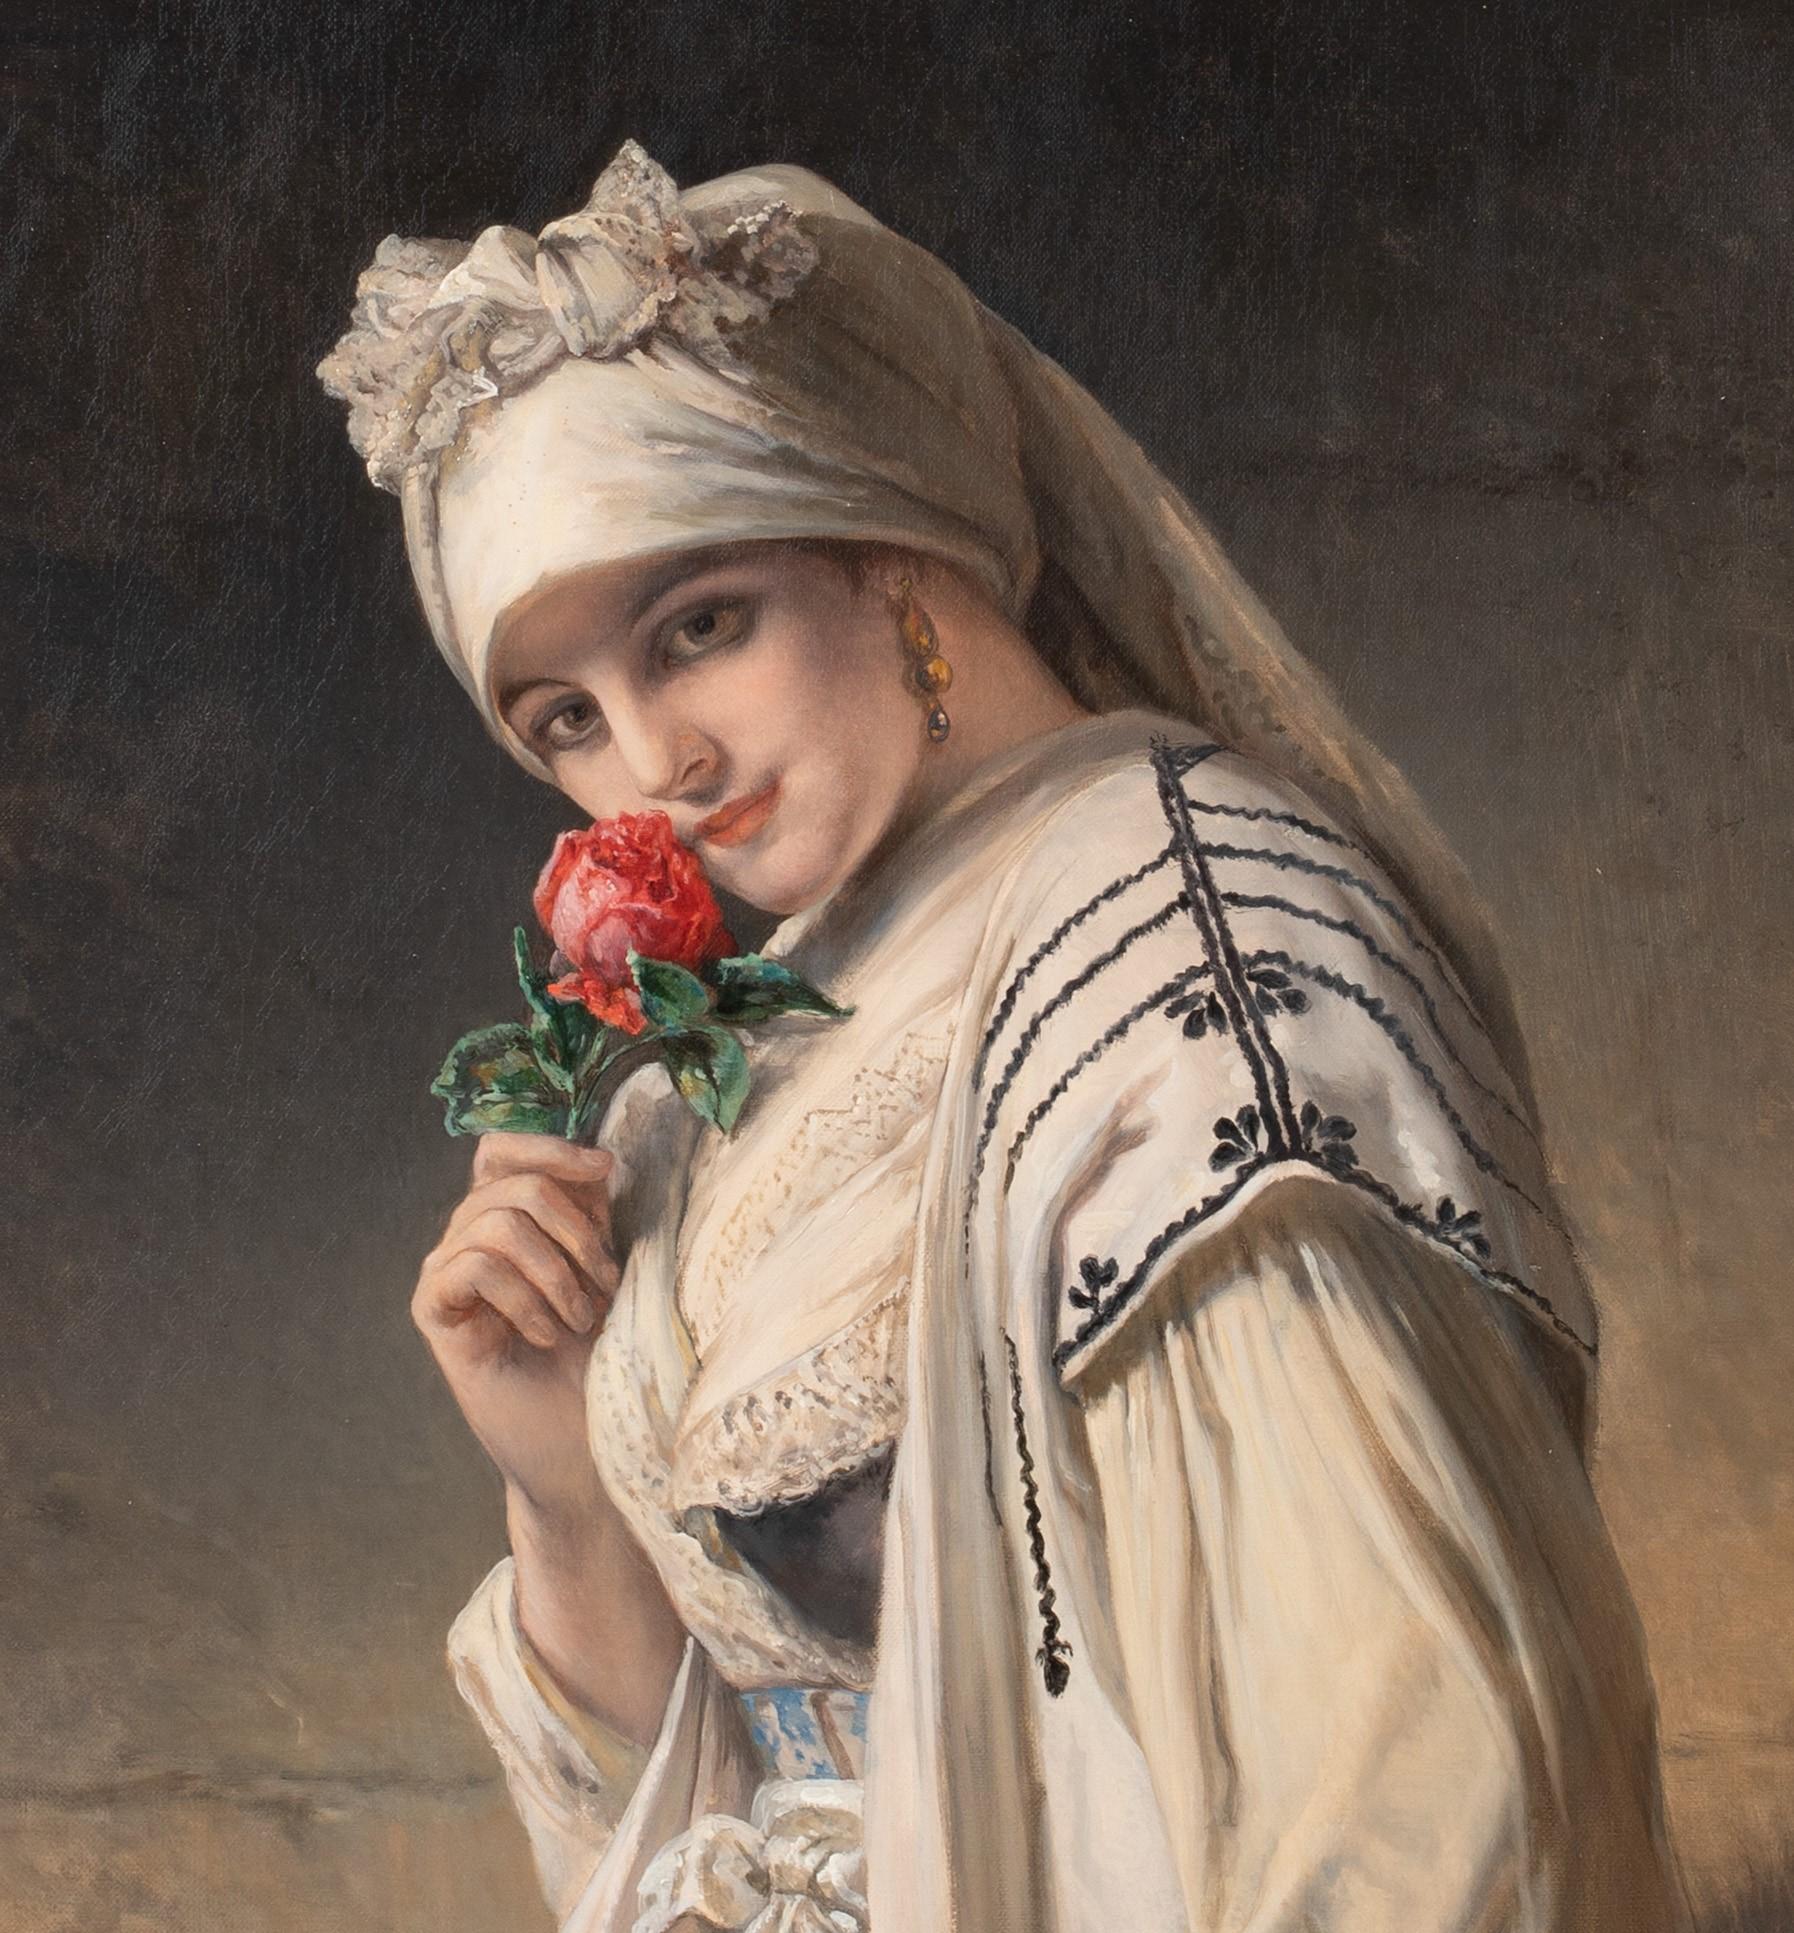 The Fragrance Of The Rose, 19th century by Jean Francois Portaels, (1818-1895) - Brown Portrait Painting by Jean-Fran�_ois Portaels